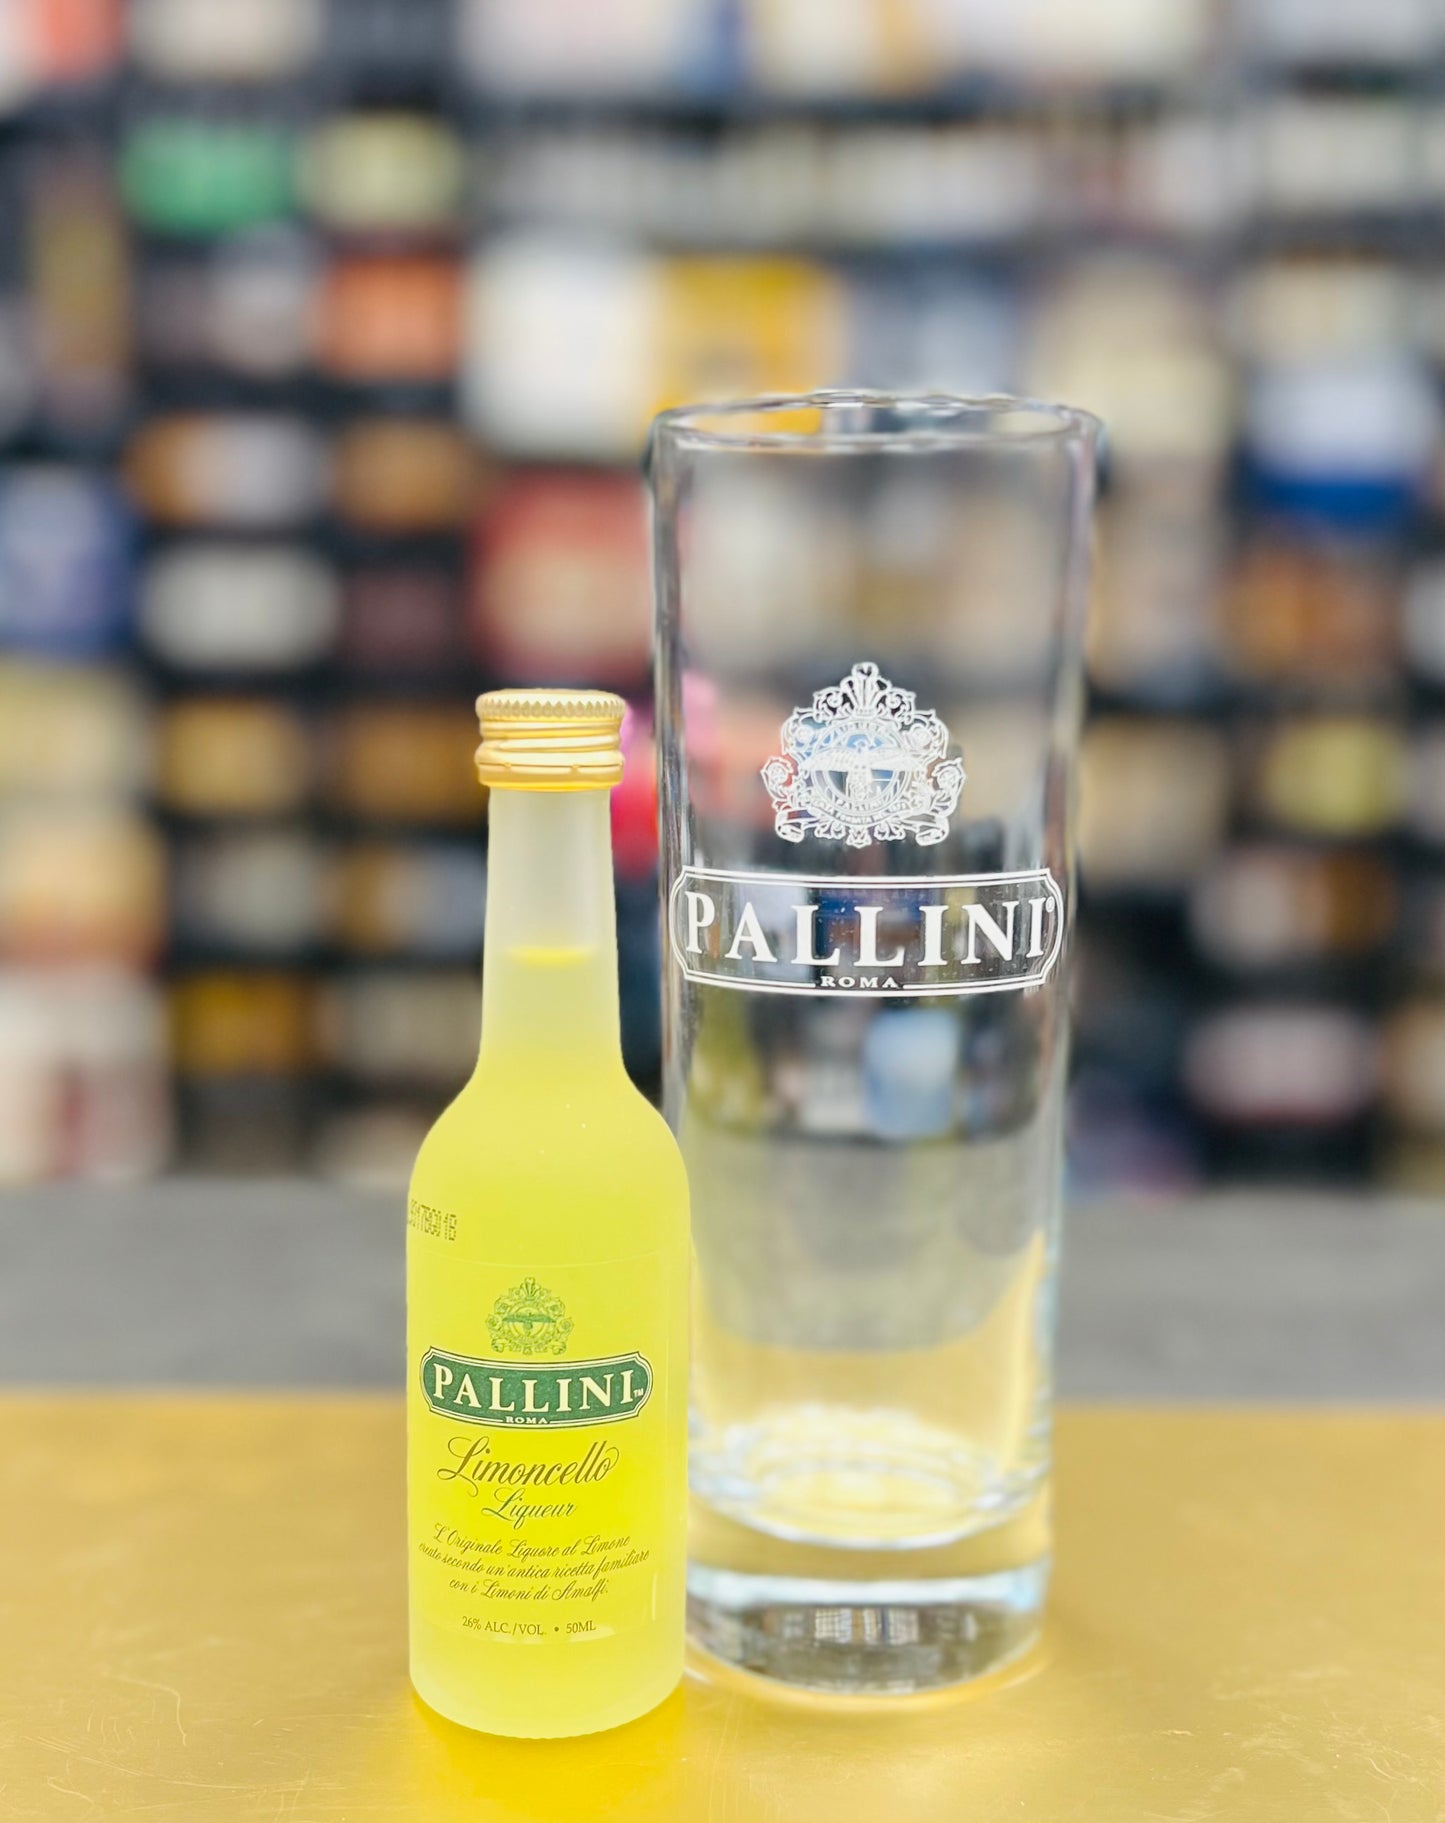 Pallini Limoncello 5cl Gift Pack with pallini branded glass